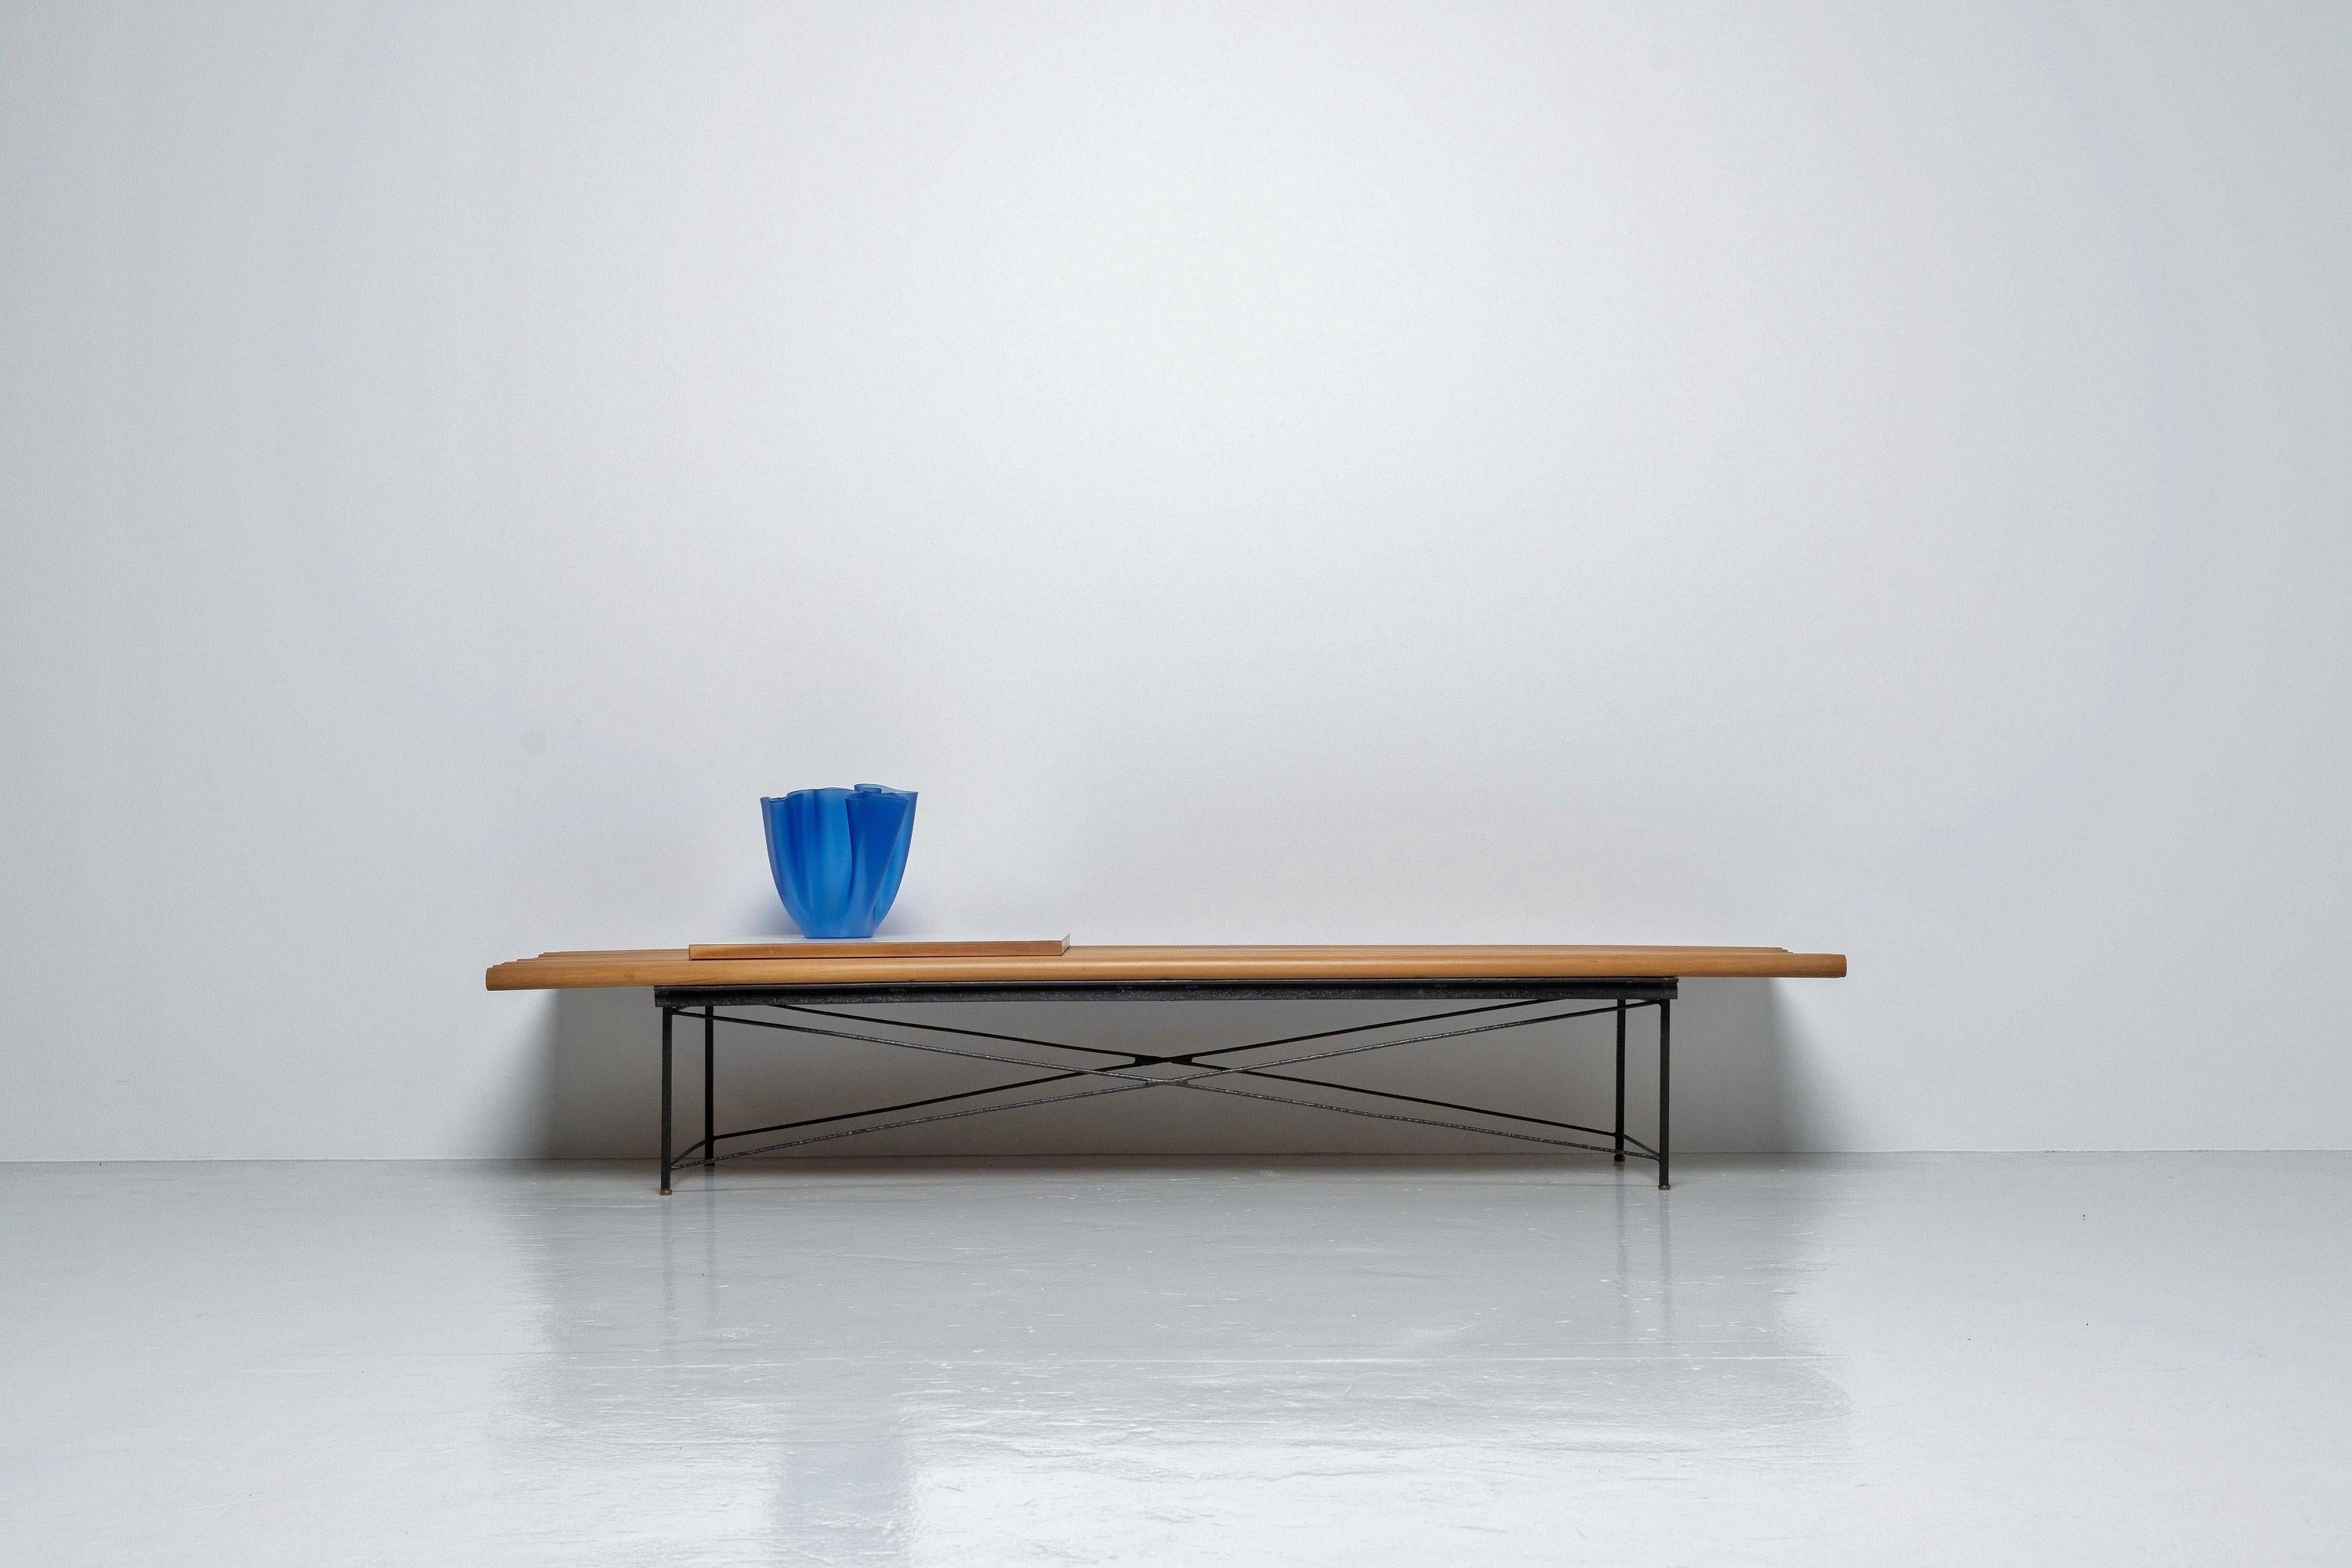 Hereby we offer you a rare chance to acquire a very unique piece from Brazil. This beautiful bench designed in the 1950’s by Brazillian architect Acácio Gil Borsoi, an architect that was born in the Rio region and moved to Recife, where he had a